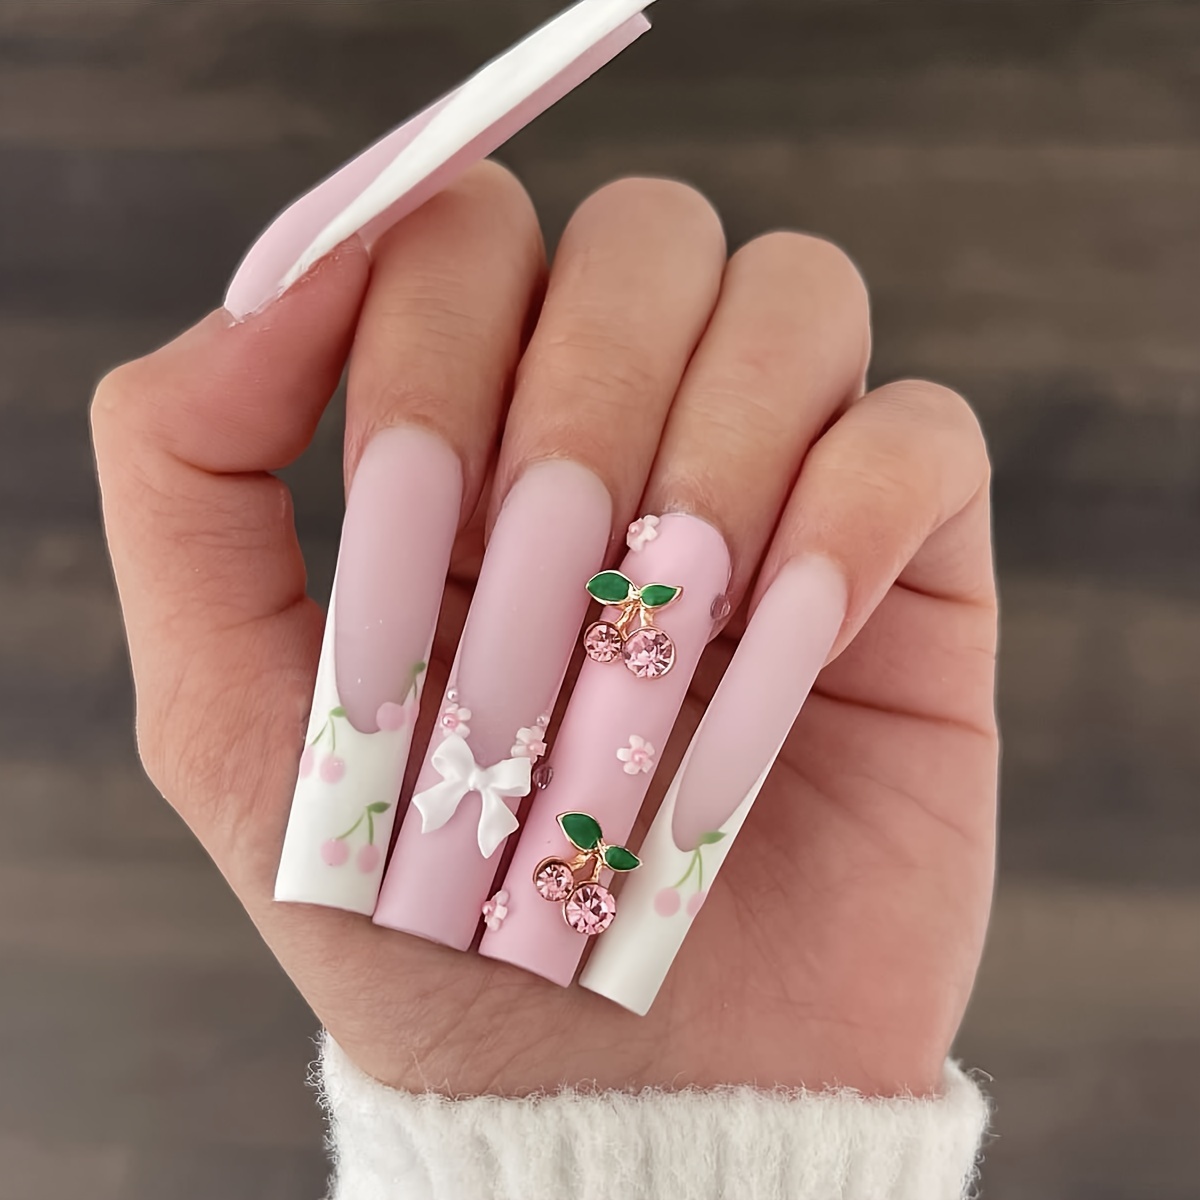 French Tip Press on Nails | Coquette nails with bows pearls and heart charms